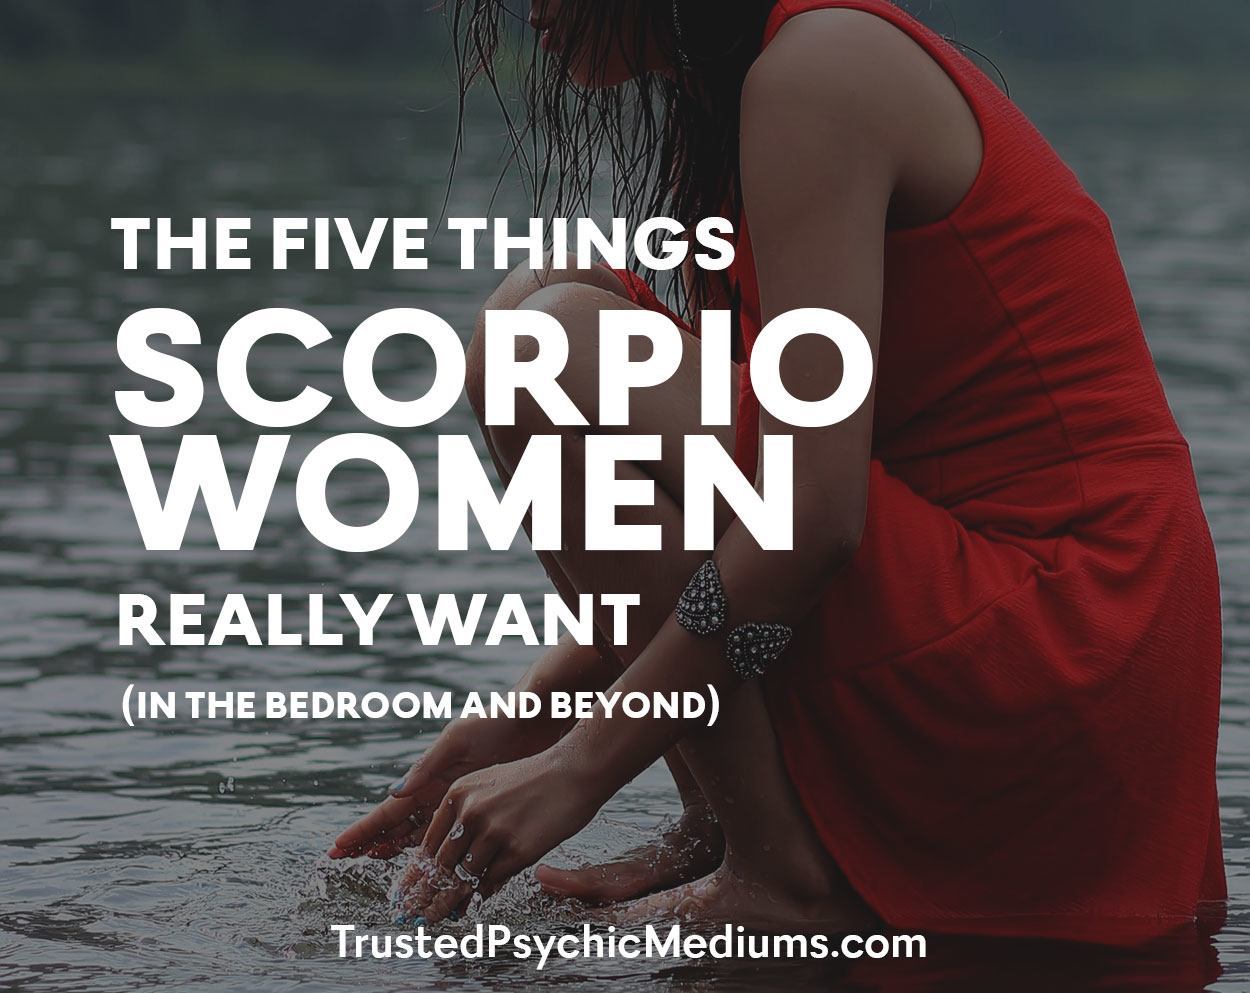 Are so why scorpio difficult women 10 Reasons